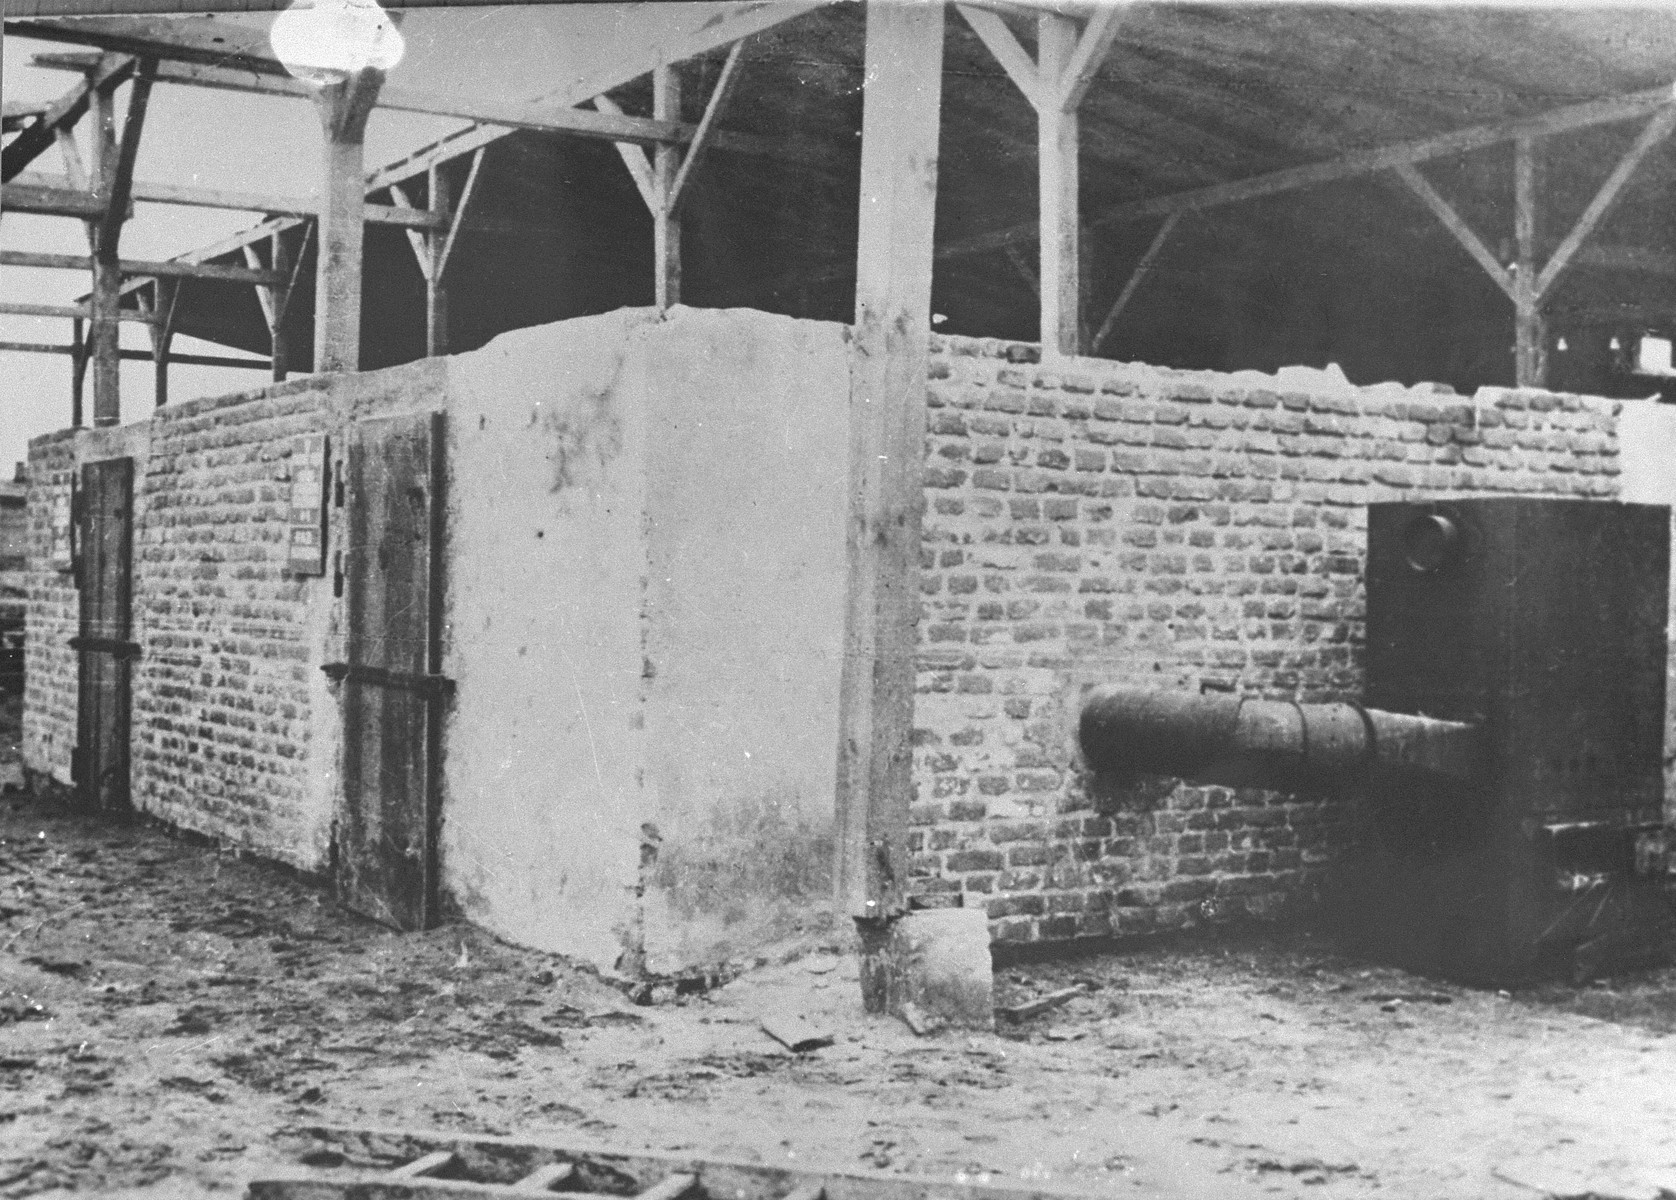 The rear side of a gas chamber.  The furnace to the right was used to create carbon monoxide for gassing prisoners. (Post-Liberation).